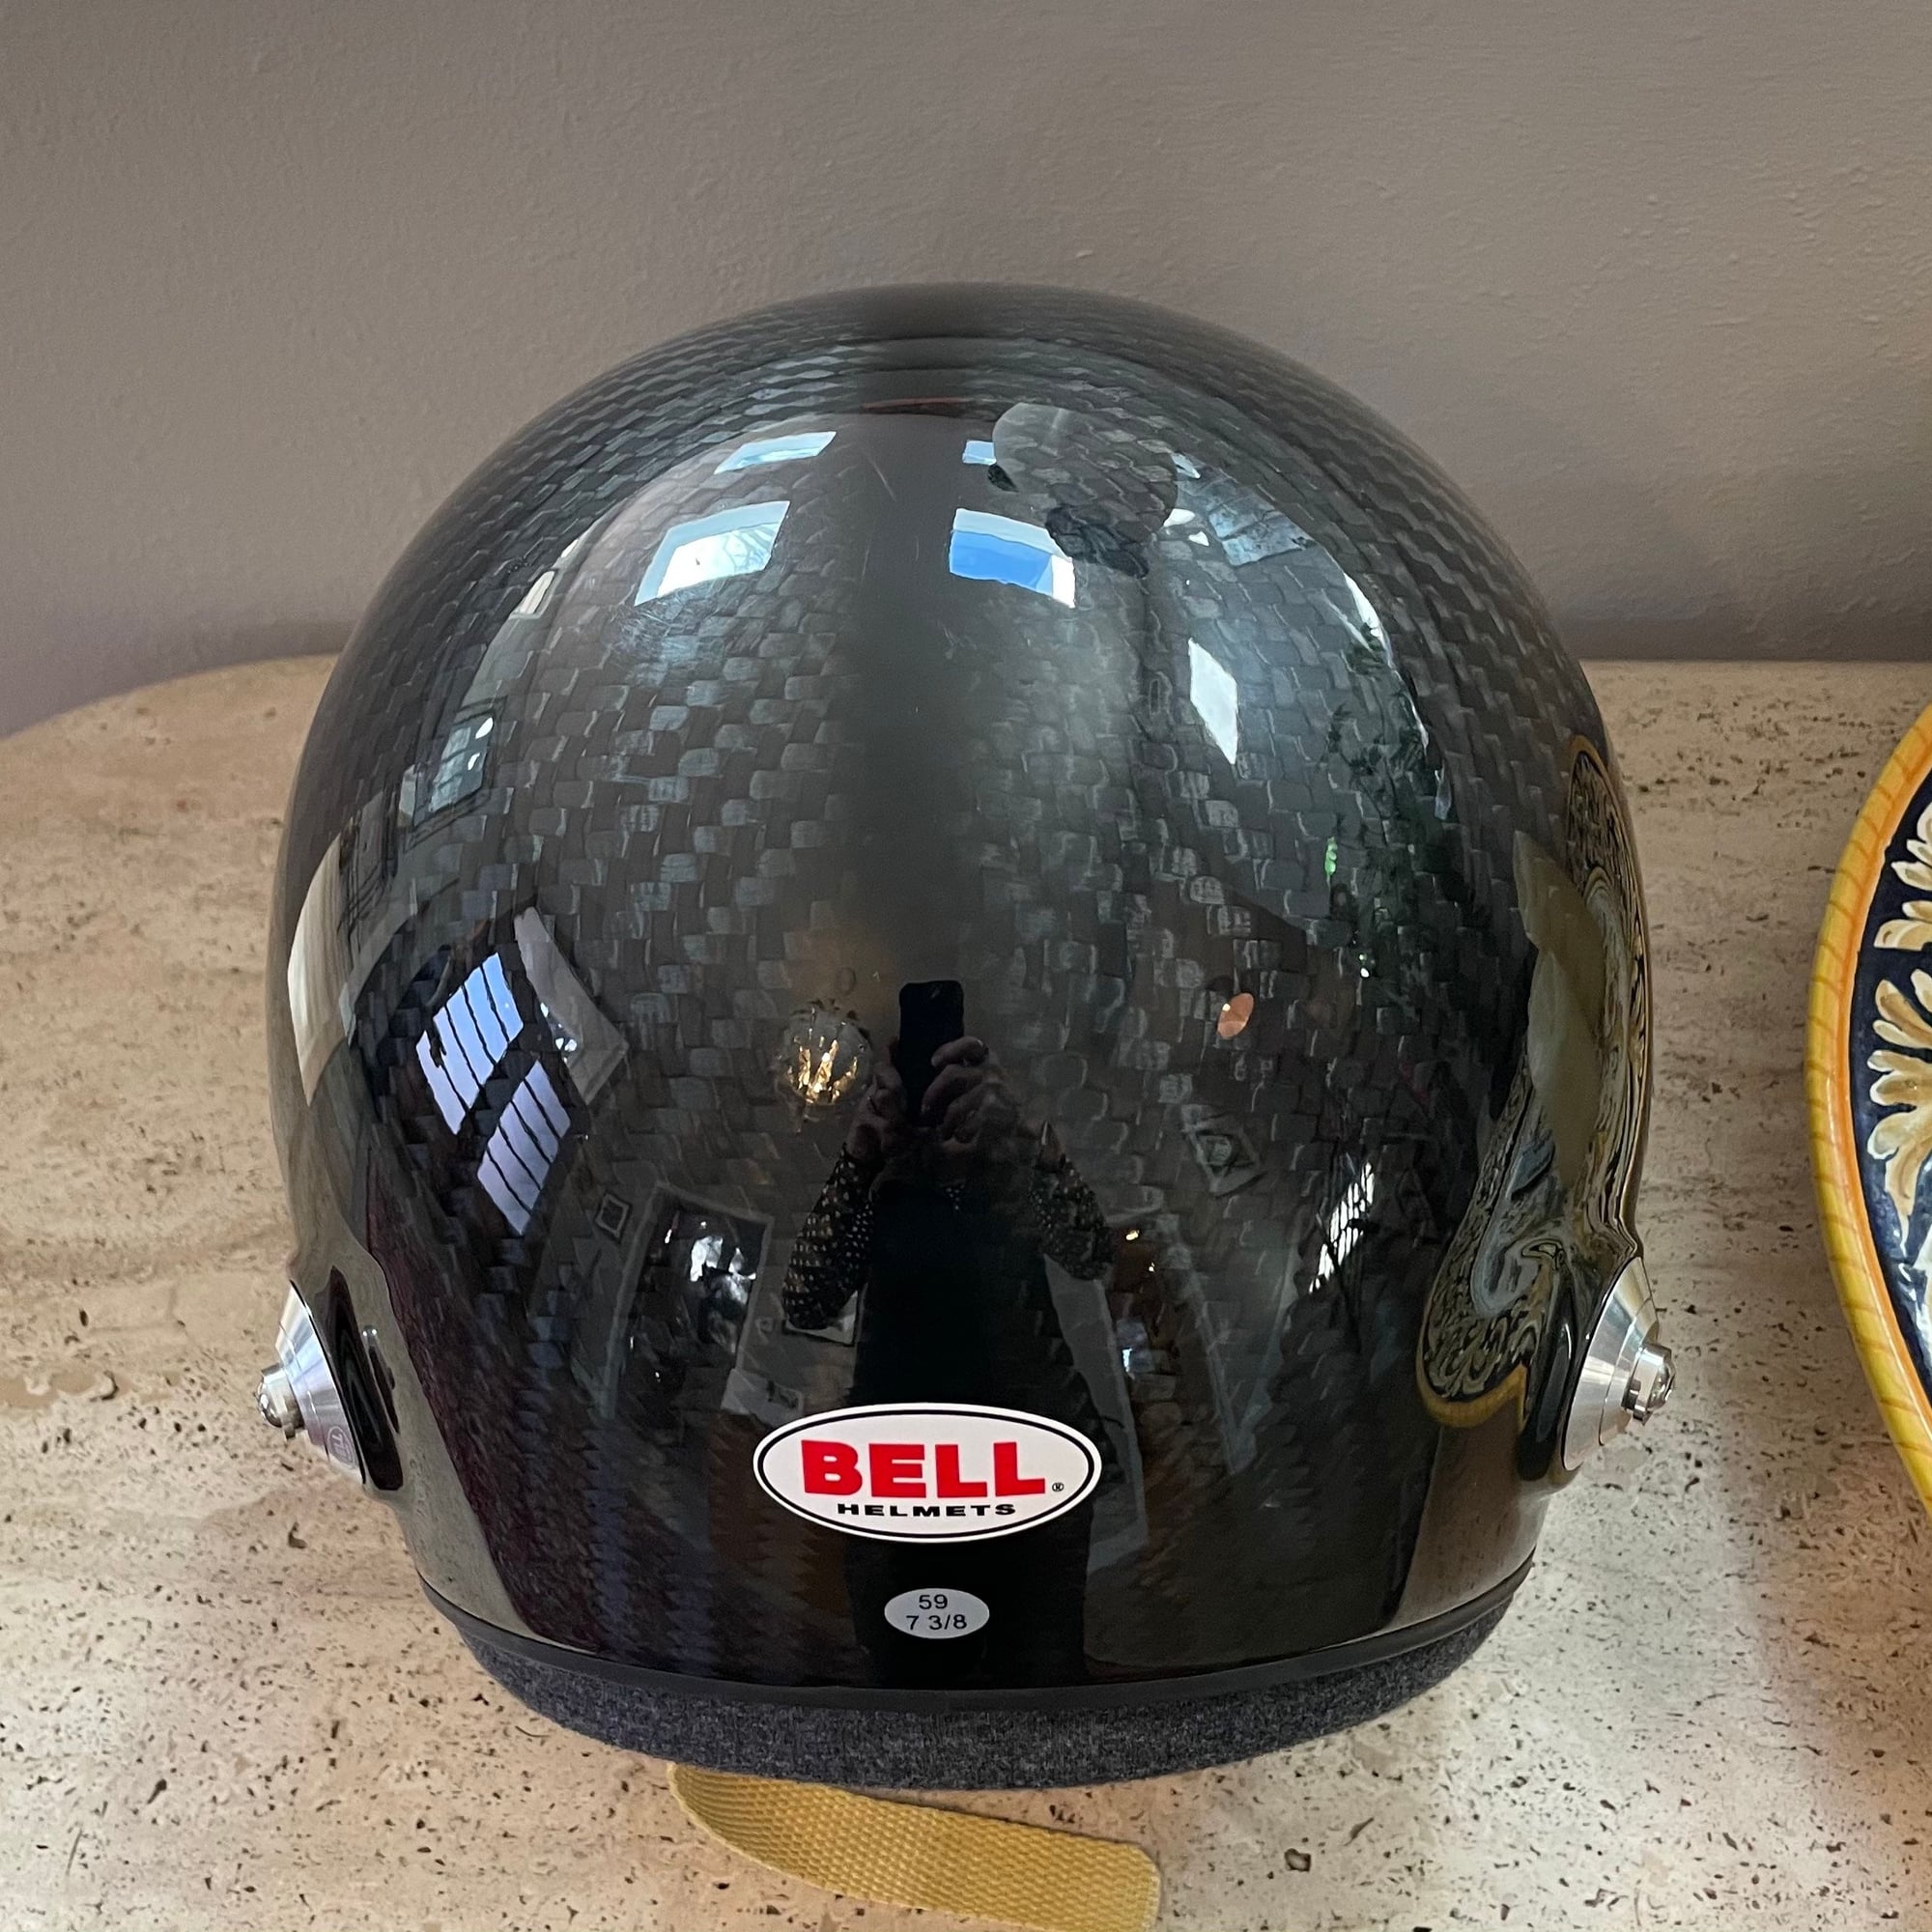 Miscellaneous - Bell Mag 9 Full Carbon open face helmet - Used - All Years Any Make All Models - Greenwood Village, CO 80121, United States